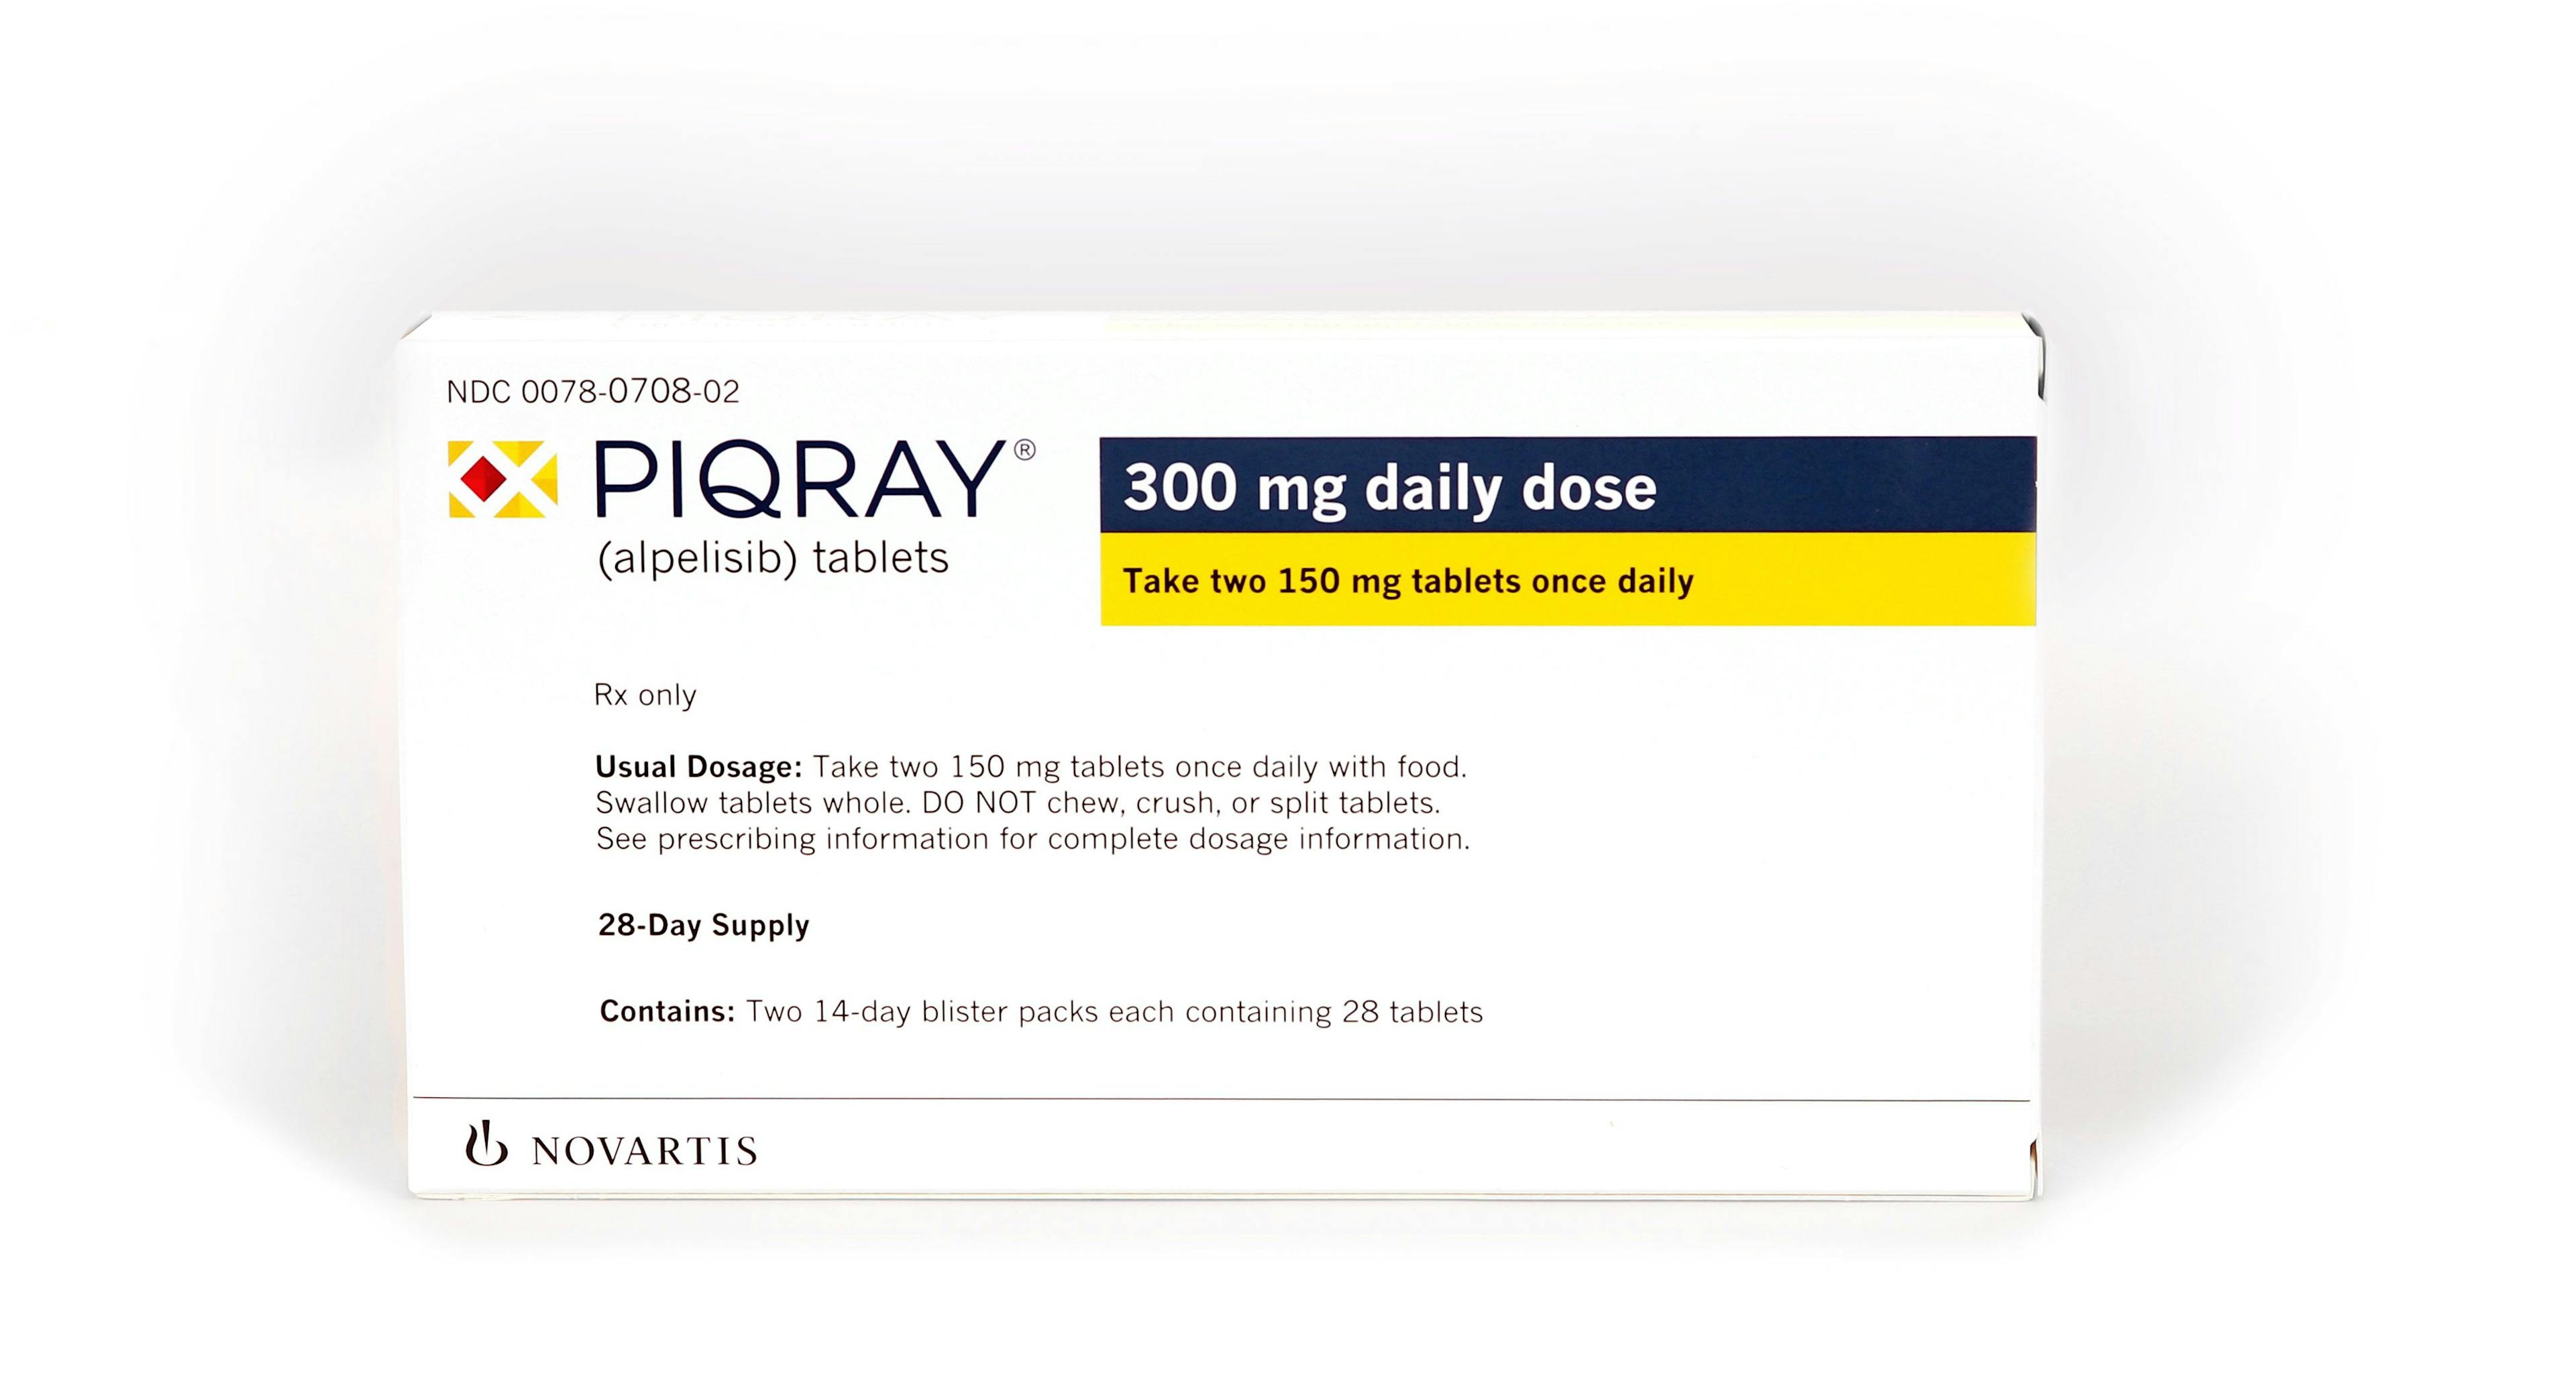 Piqray’s Safety Label is Updated